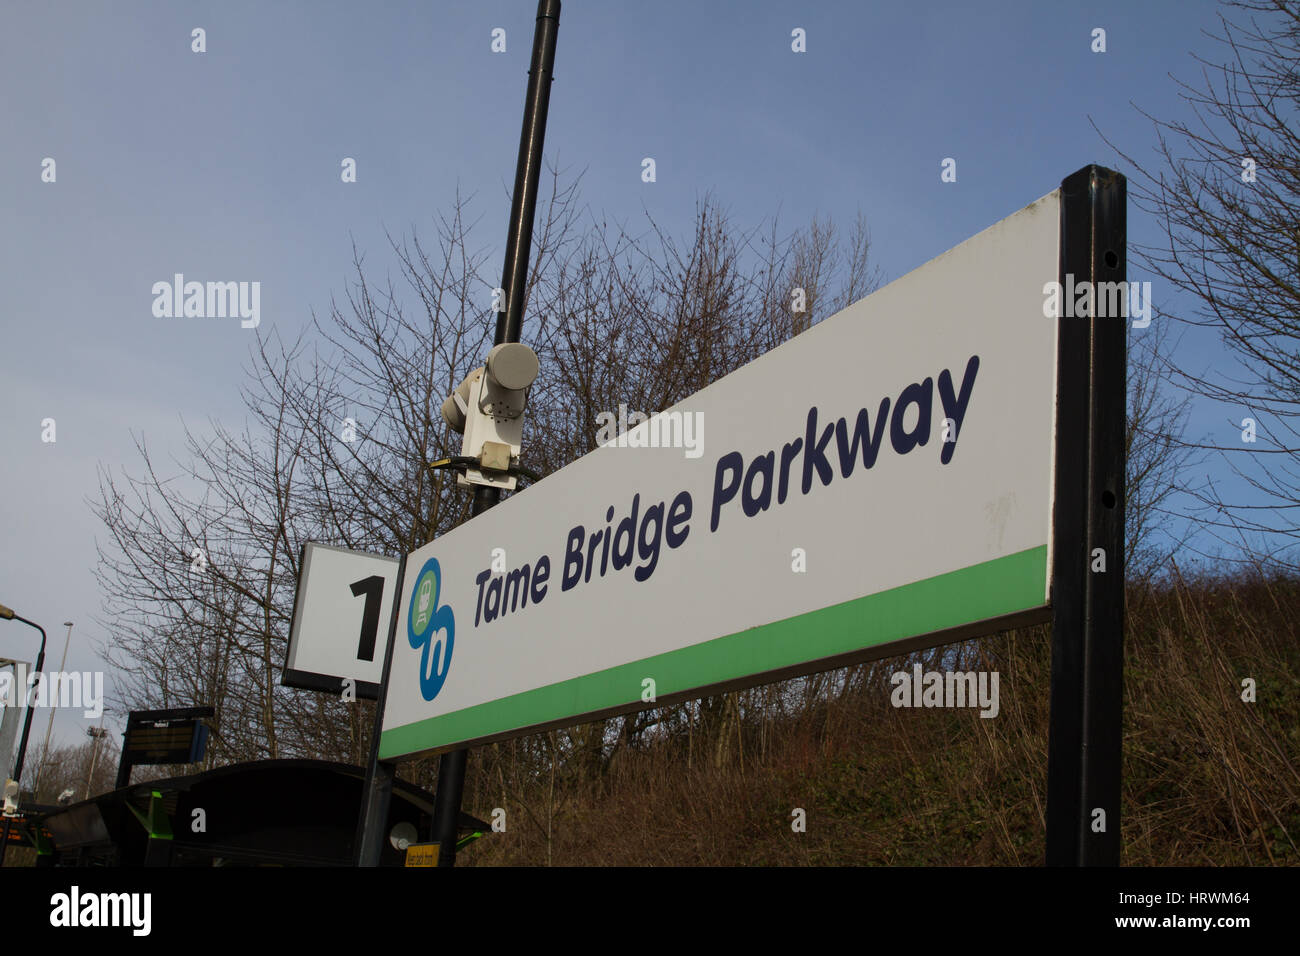 Tame Bridge Parkway Railway Station Train Station just outside Birmingham operated by London Midland Station sign. Stock Photo